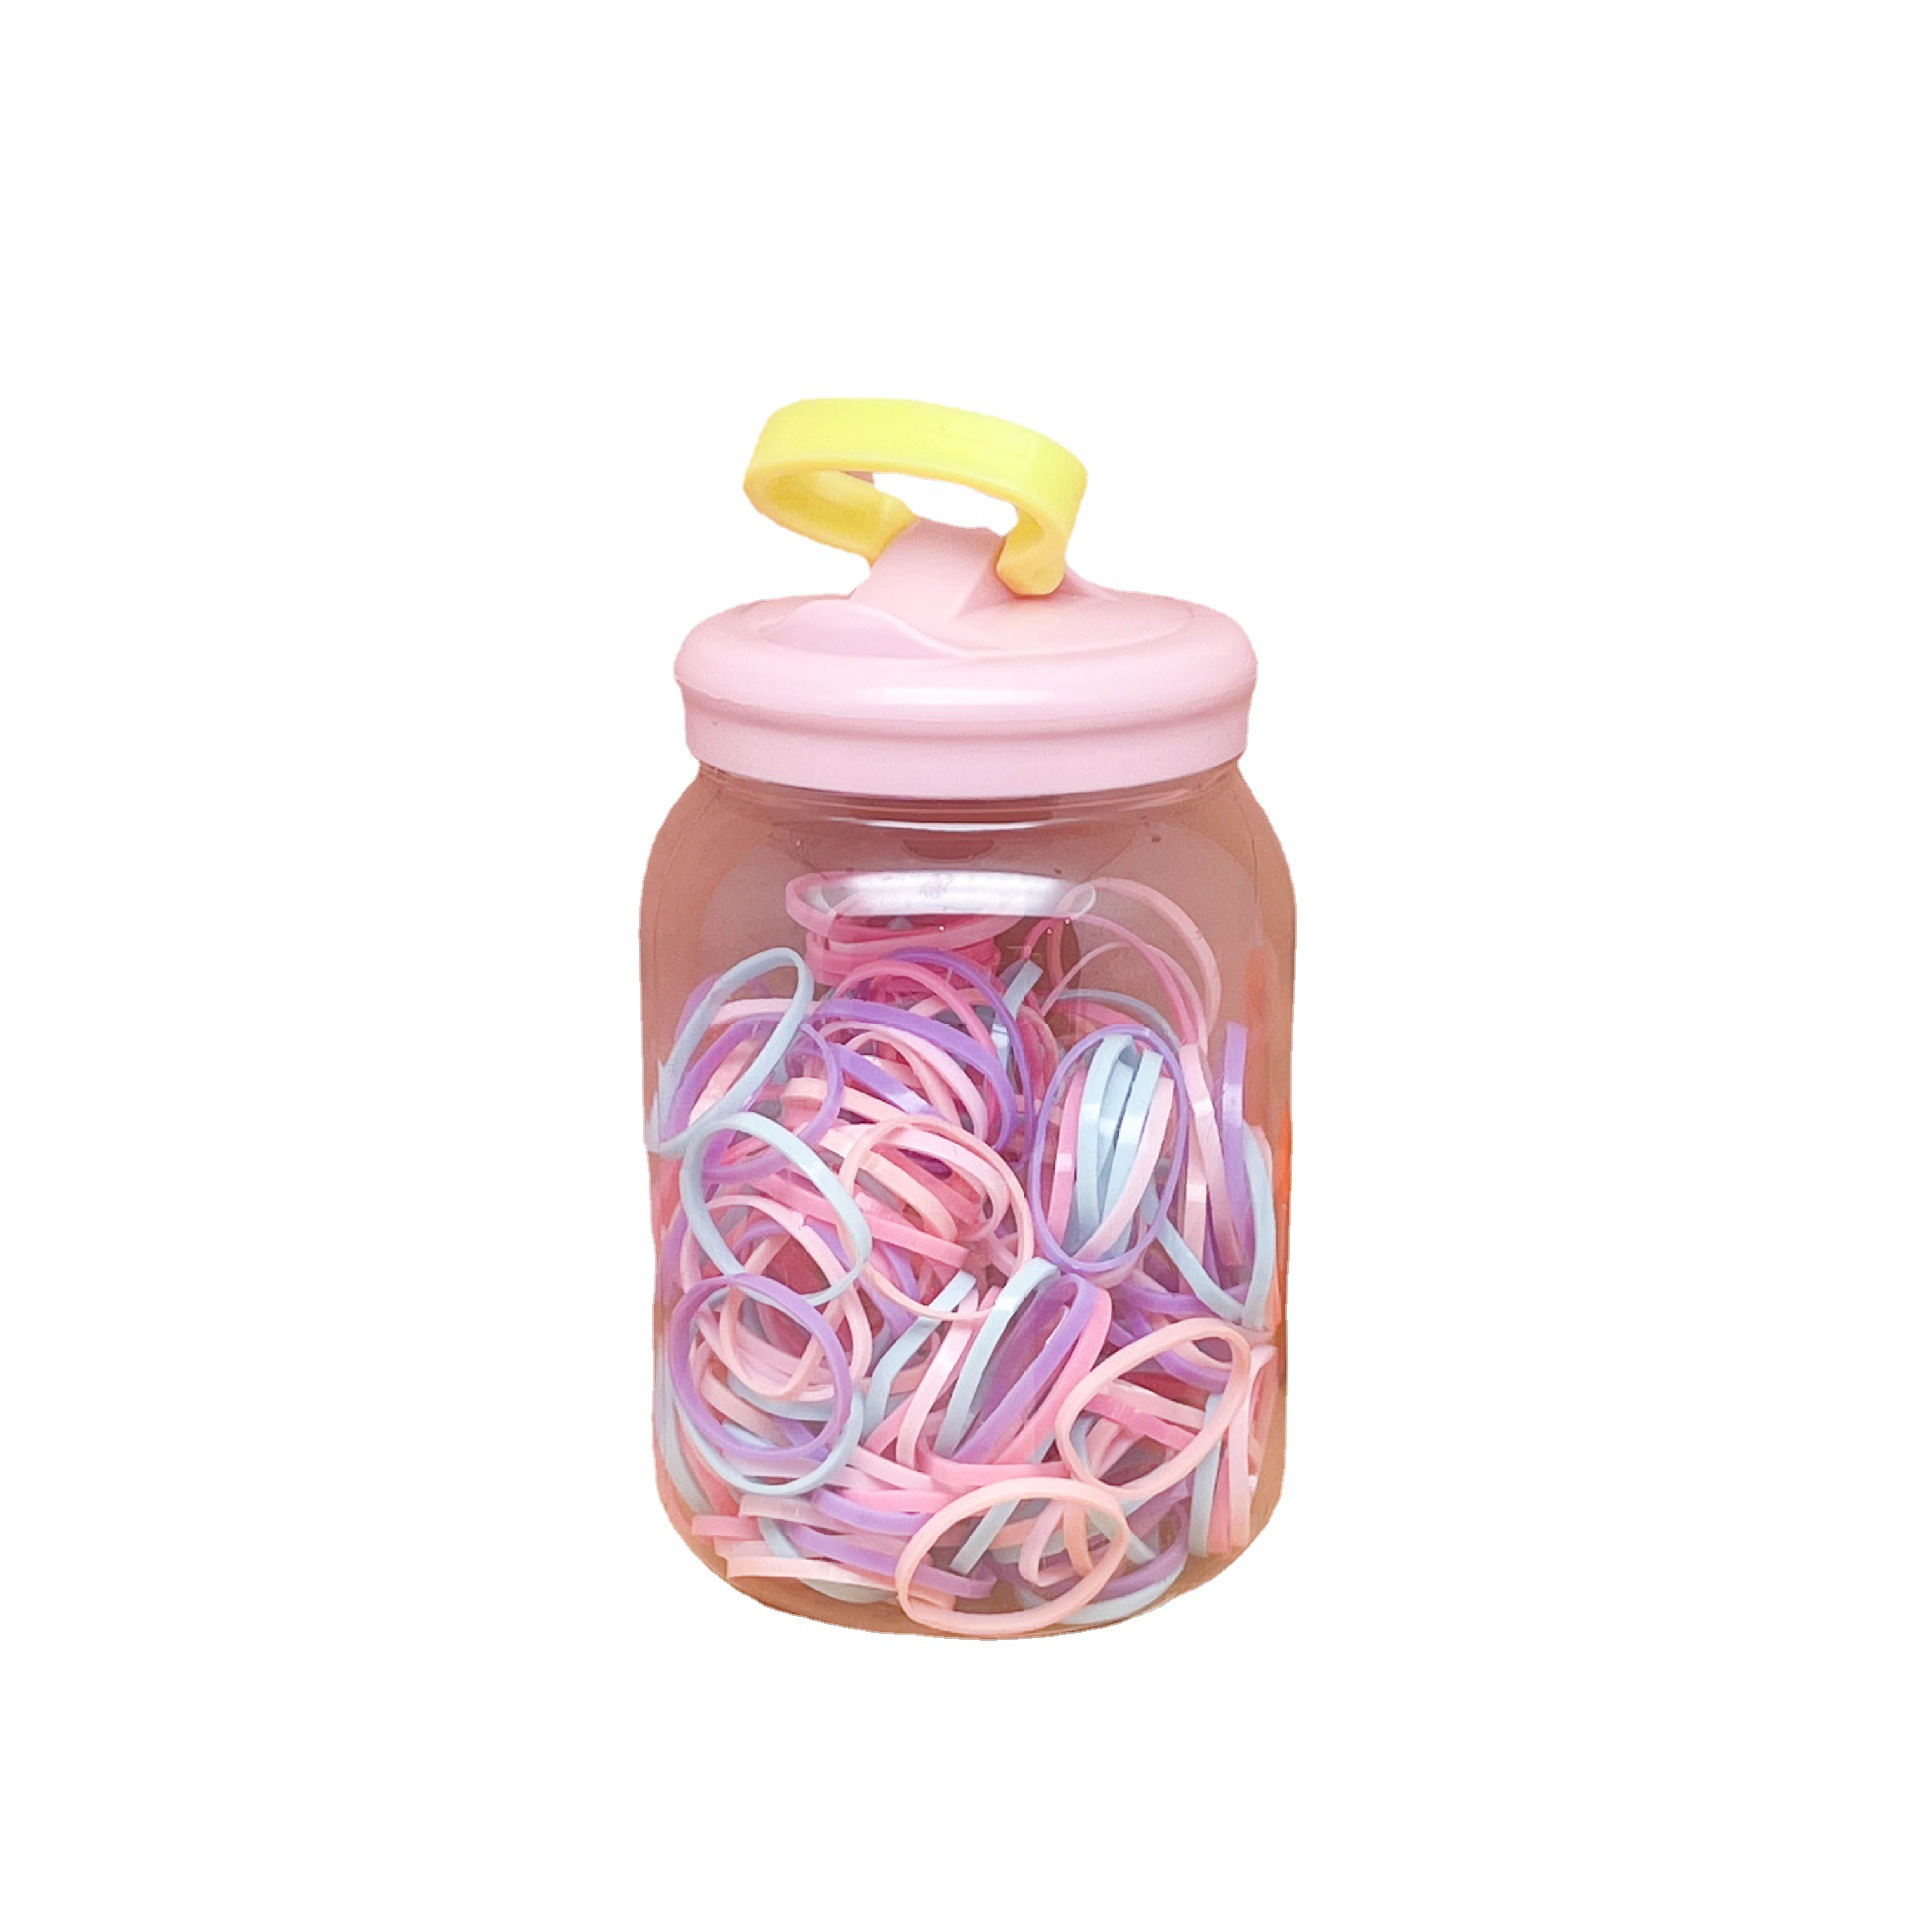 New Korean Style Bottled Children's High Elastic Rubber Band Baby Does Not Hurt Hair Do Not Cry Hair Rope High Quality Disposable Rubber Band